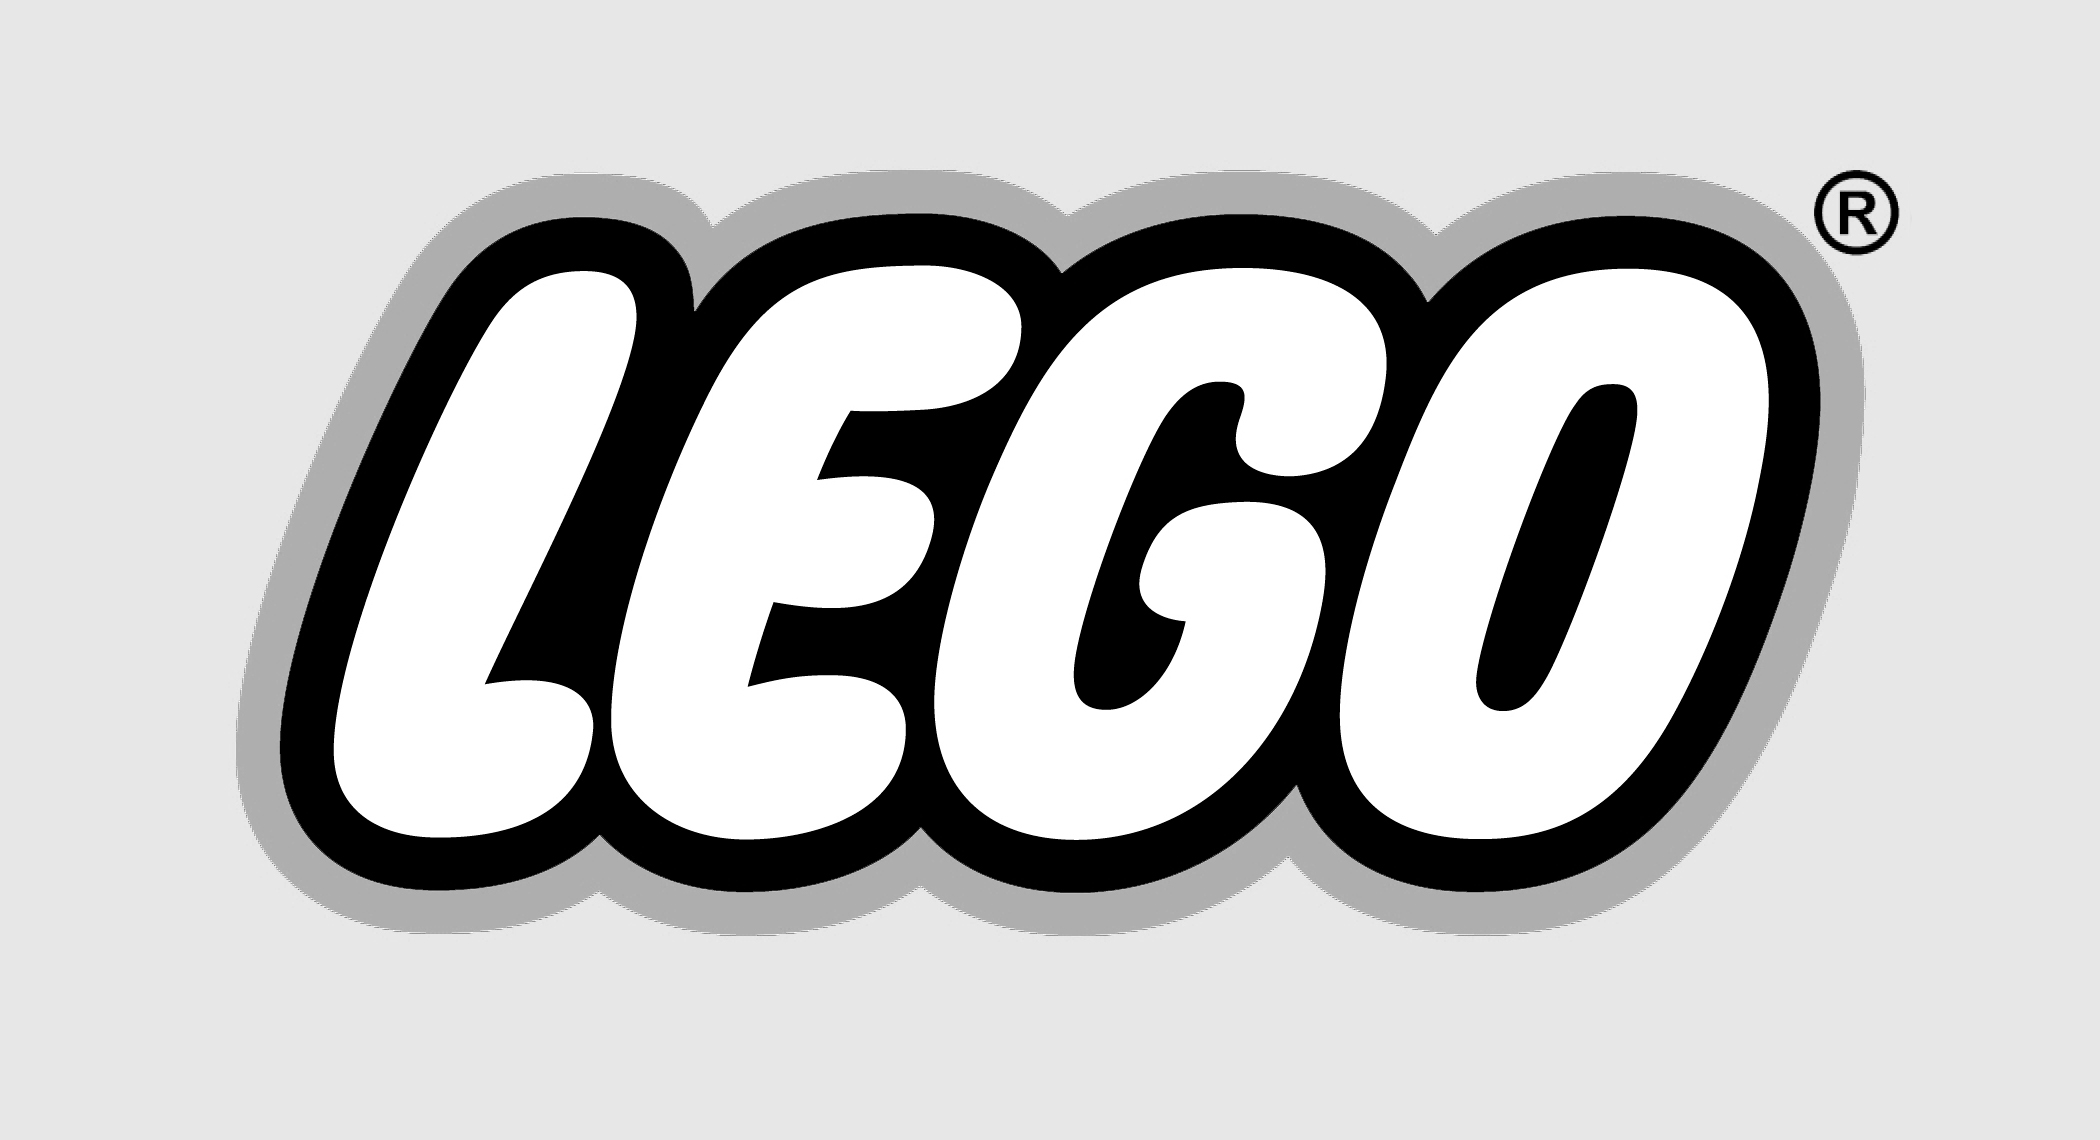 Meaning Lego logo and symbol | history and evolution